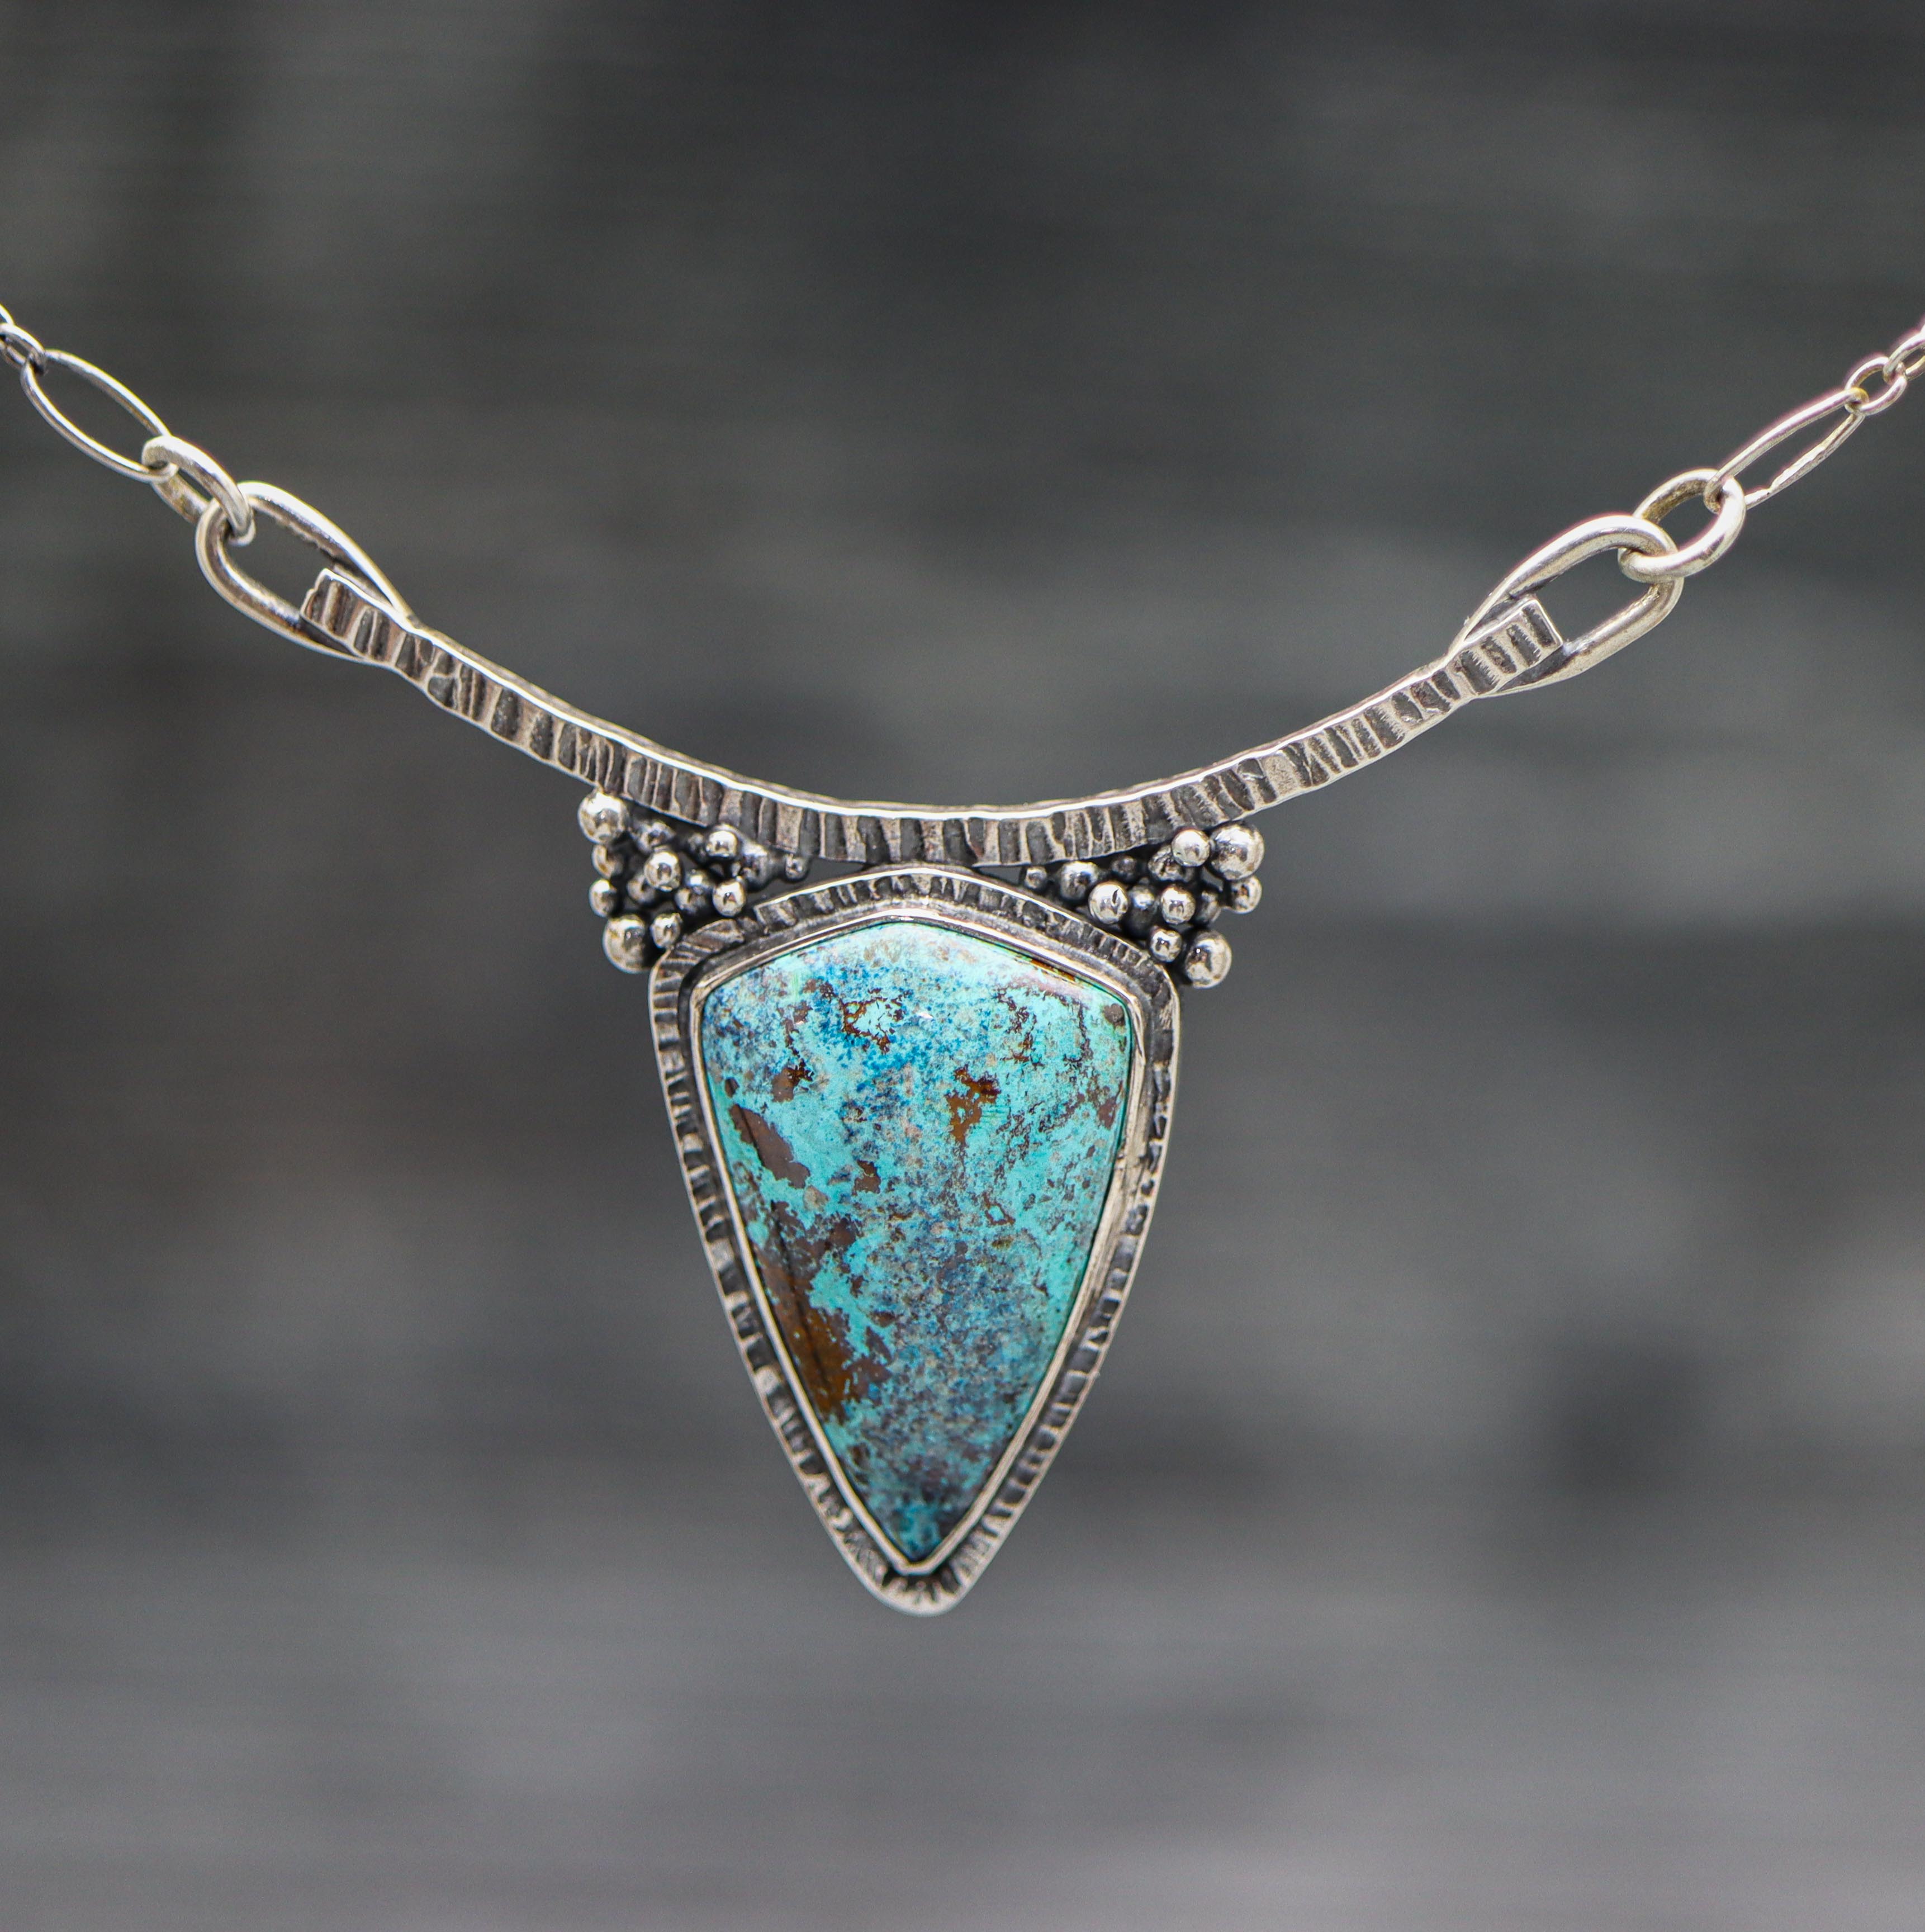 Vivid Blue Shattukite Pendant Sterling Silver One Of a Kind Gemstone Necklace